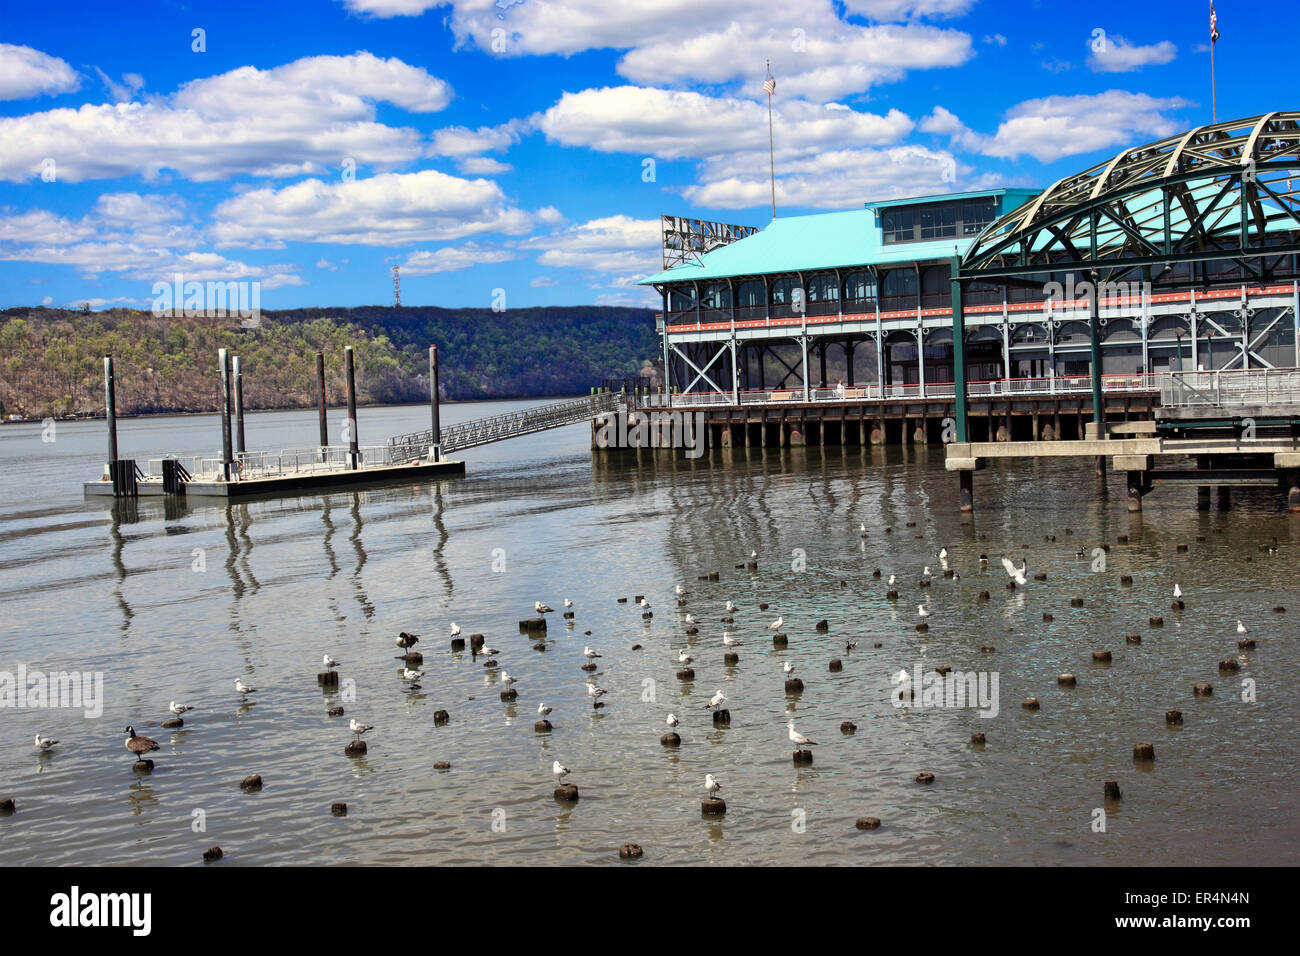 Downtown waterfront district Yonkers New York Stock Photo